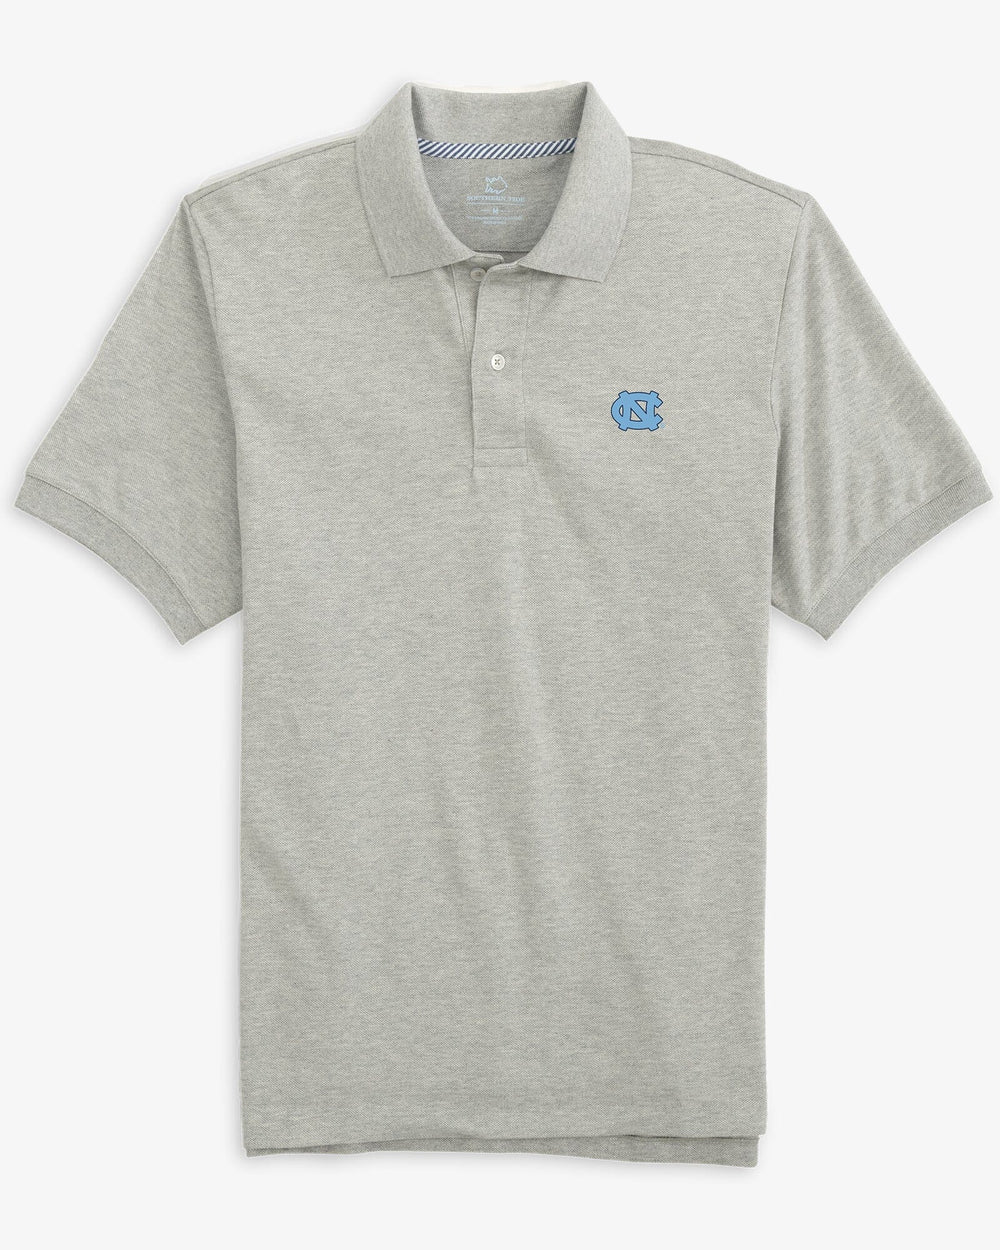 The front view of the UNC Tar Heels Men's New Short Sleeve Skipjack Polo by Southern Tide - Heather Grey